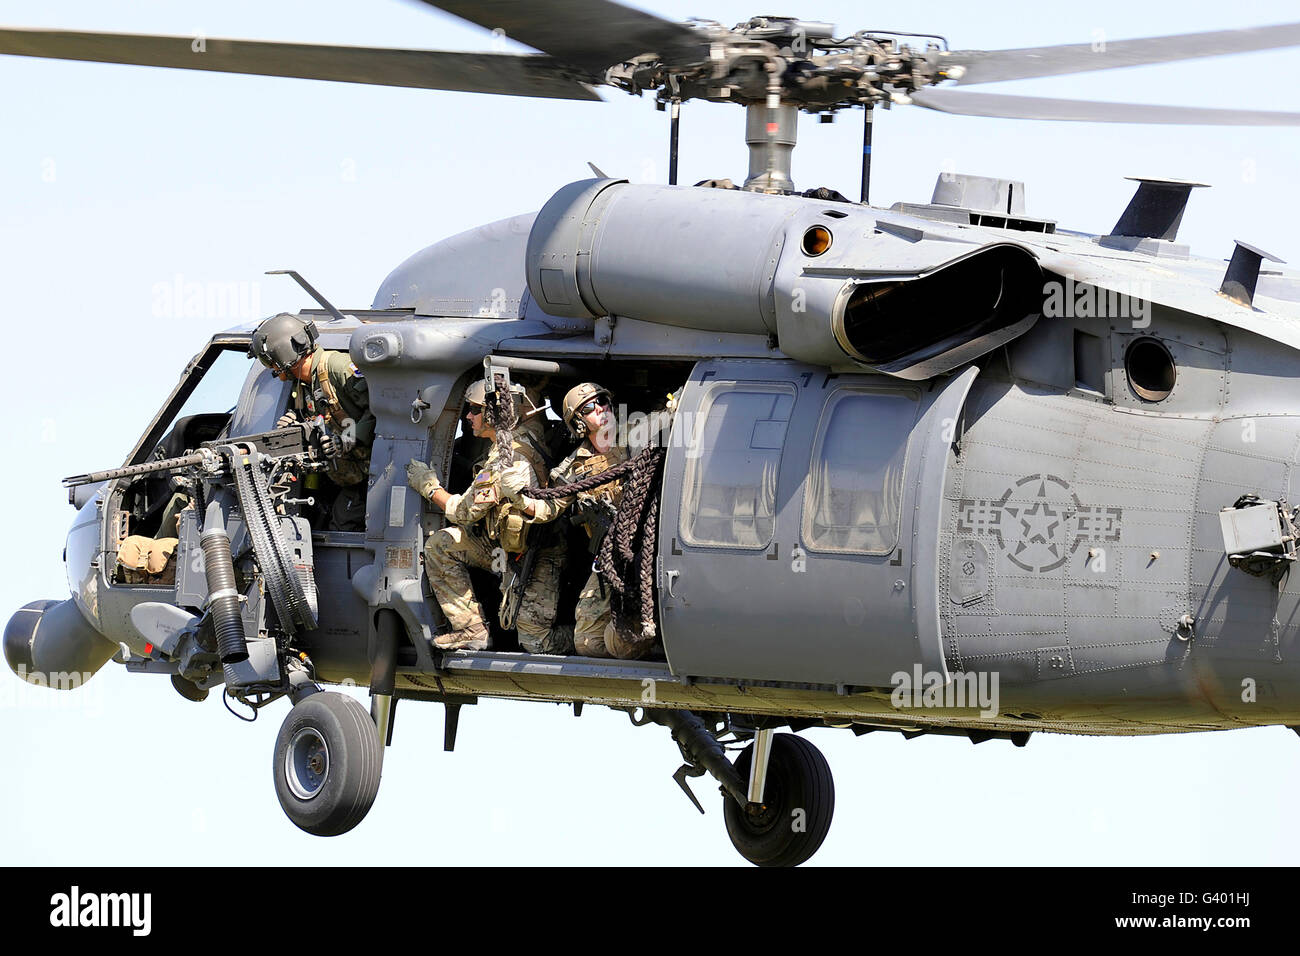 An HH-60 Pave Hawk helicopter crew. Stock Photo